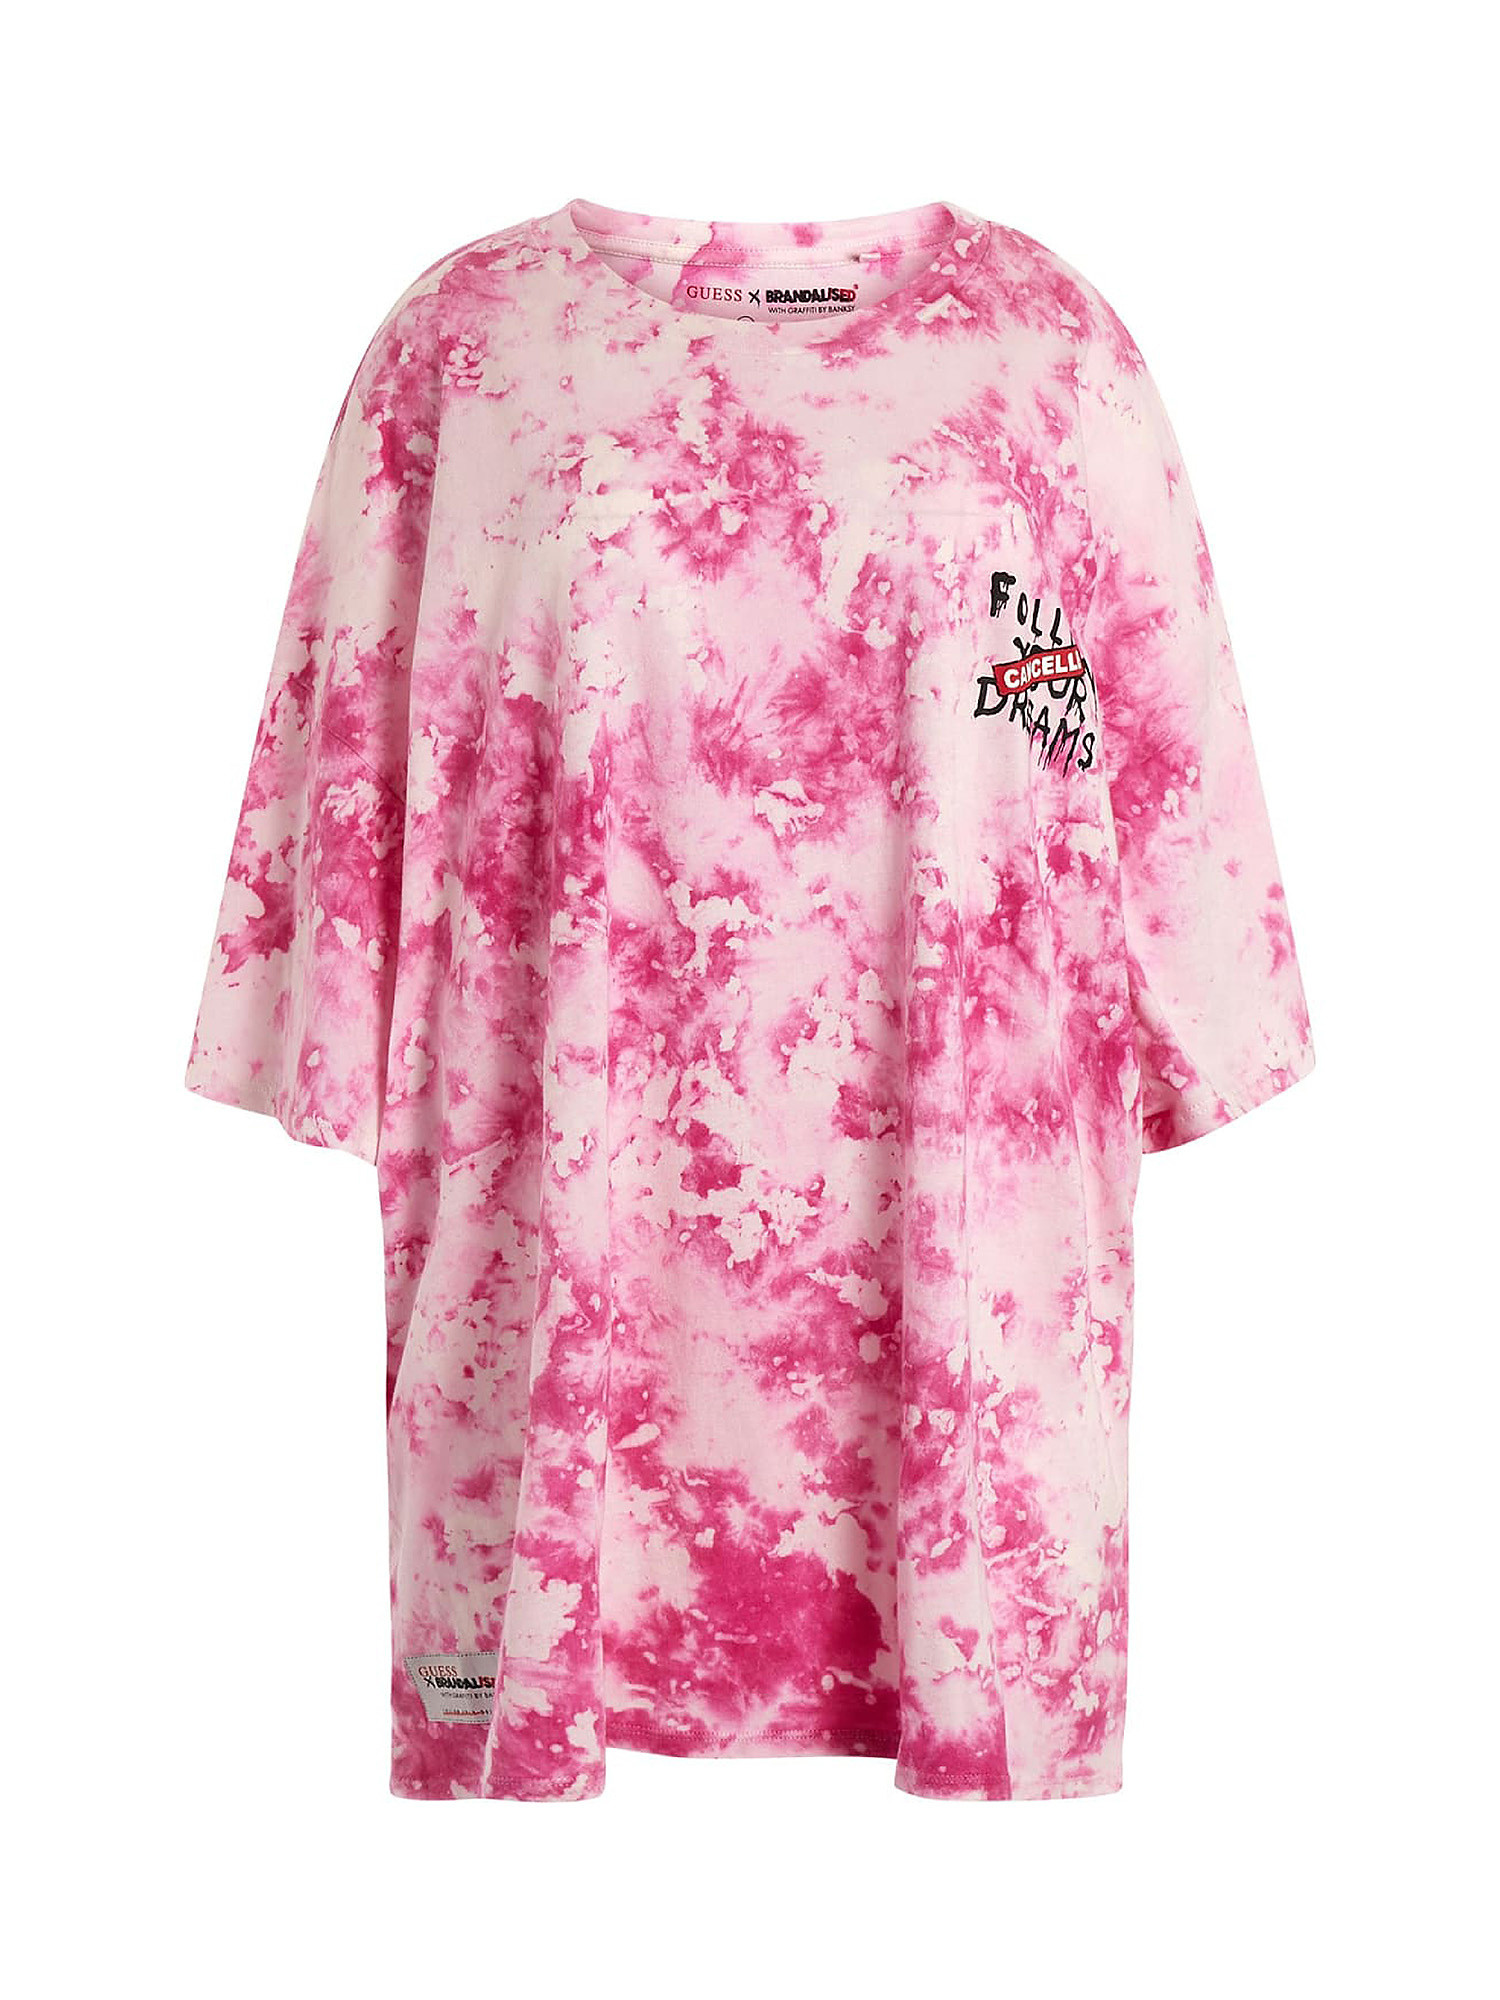 GUESS - Tie-dye T-shirt, Pink, large image number 1